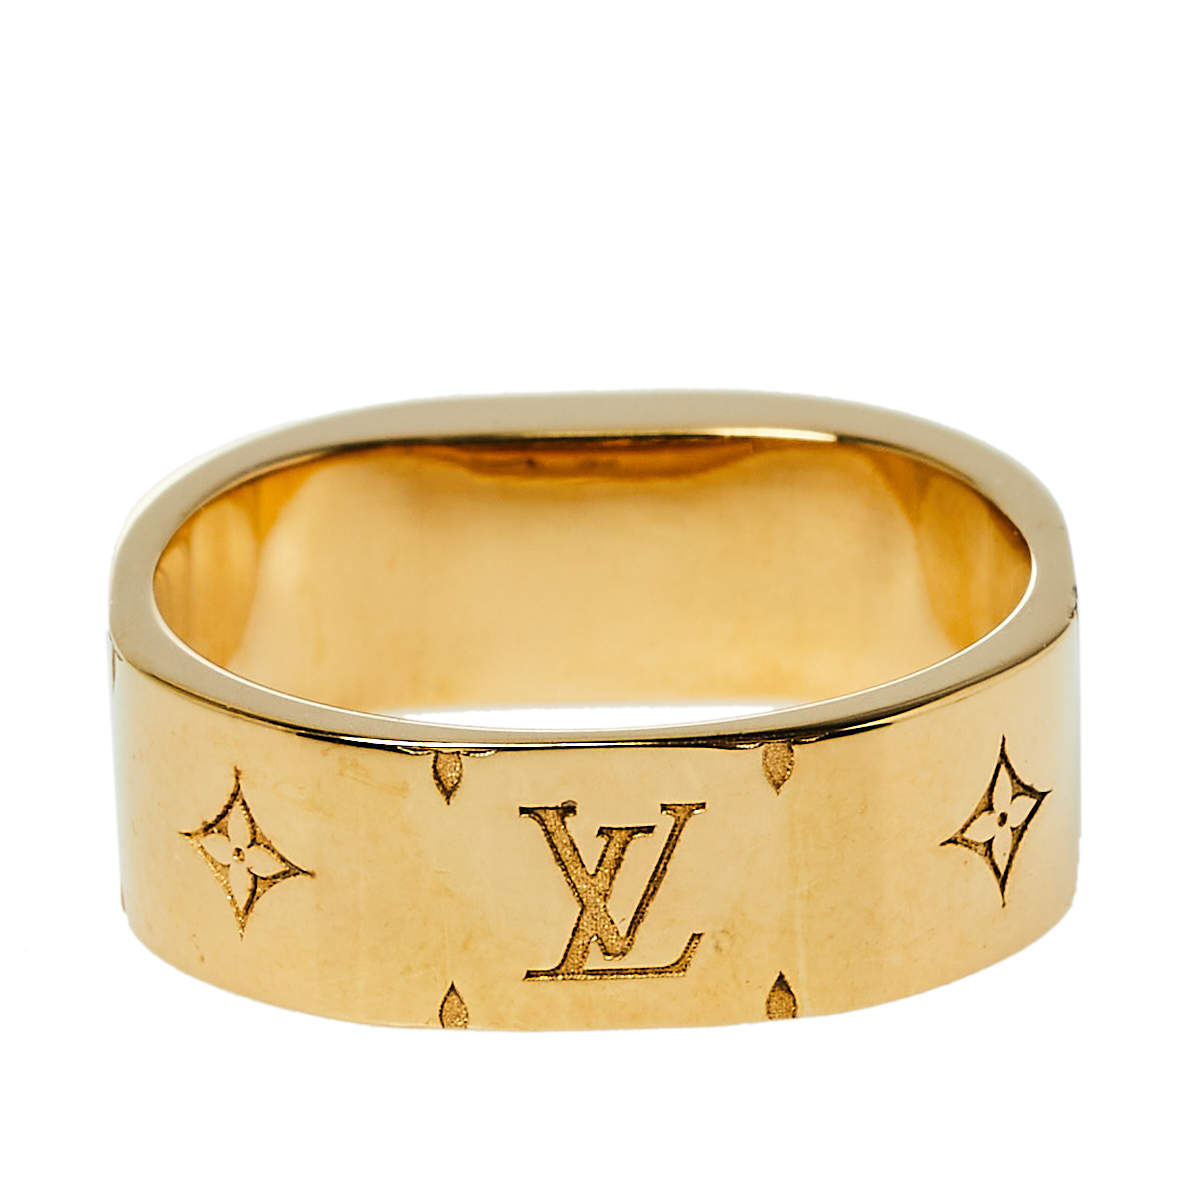 Spotted while shopping on Poshmark: Louis Vuitton Nanogram ring in